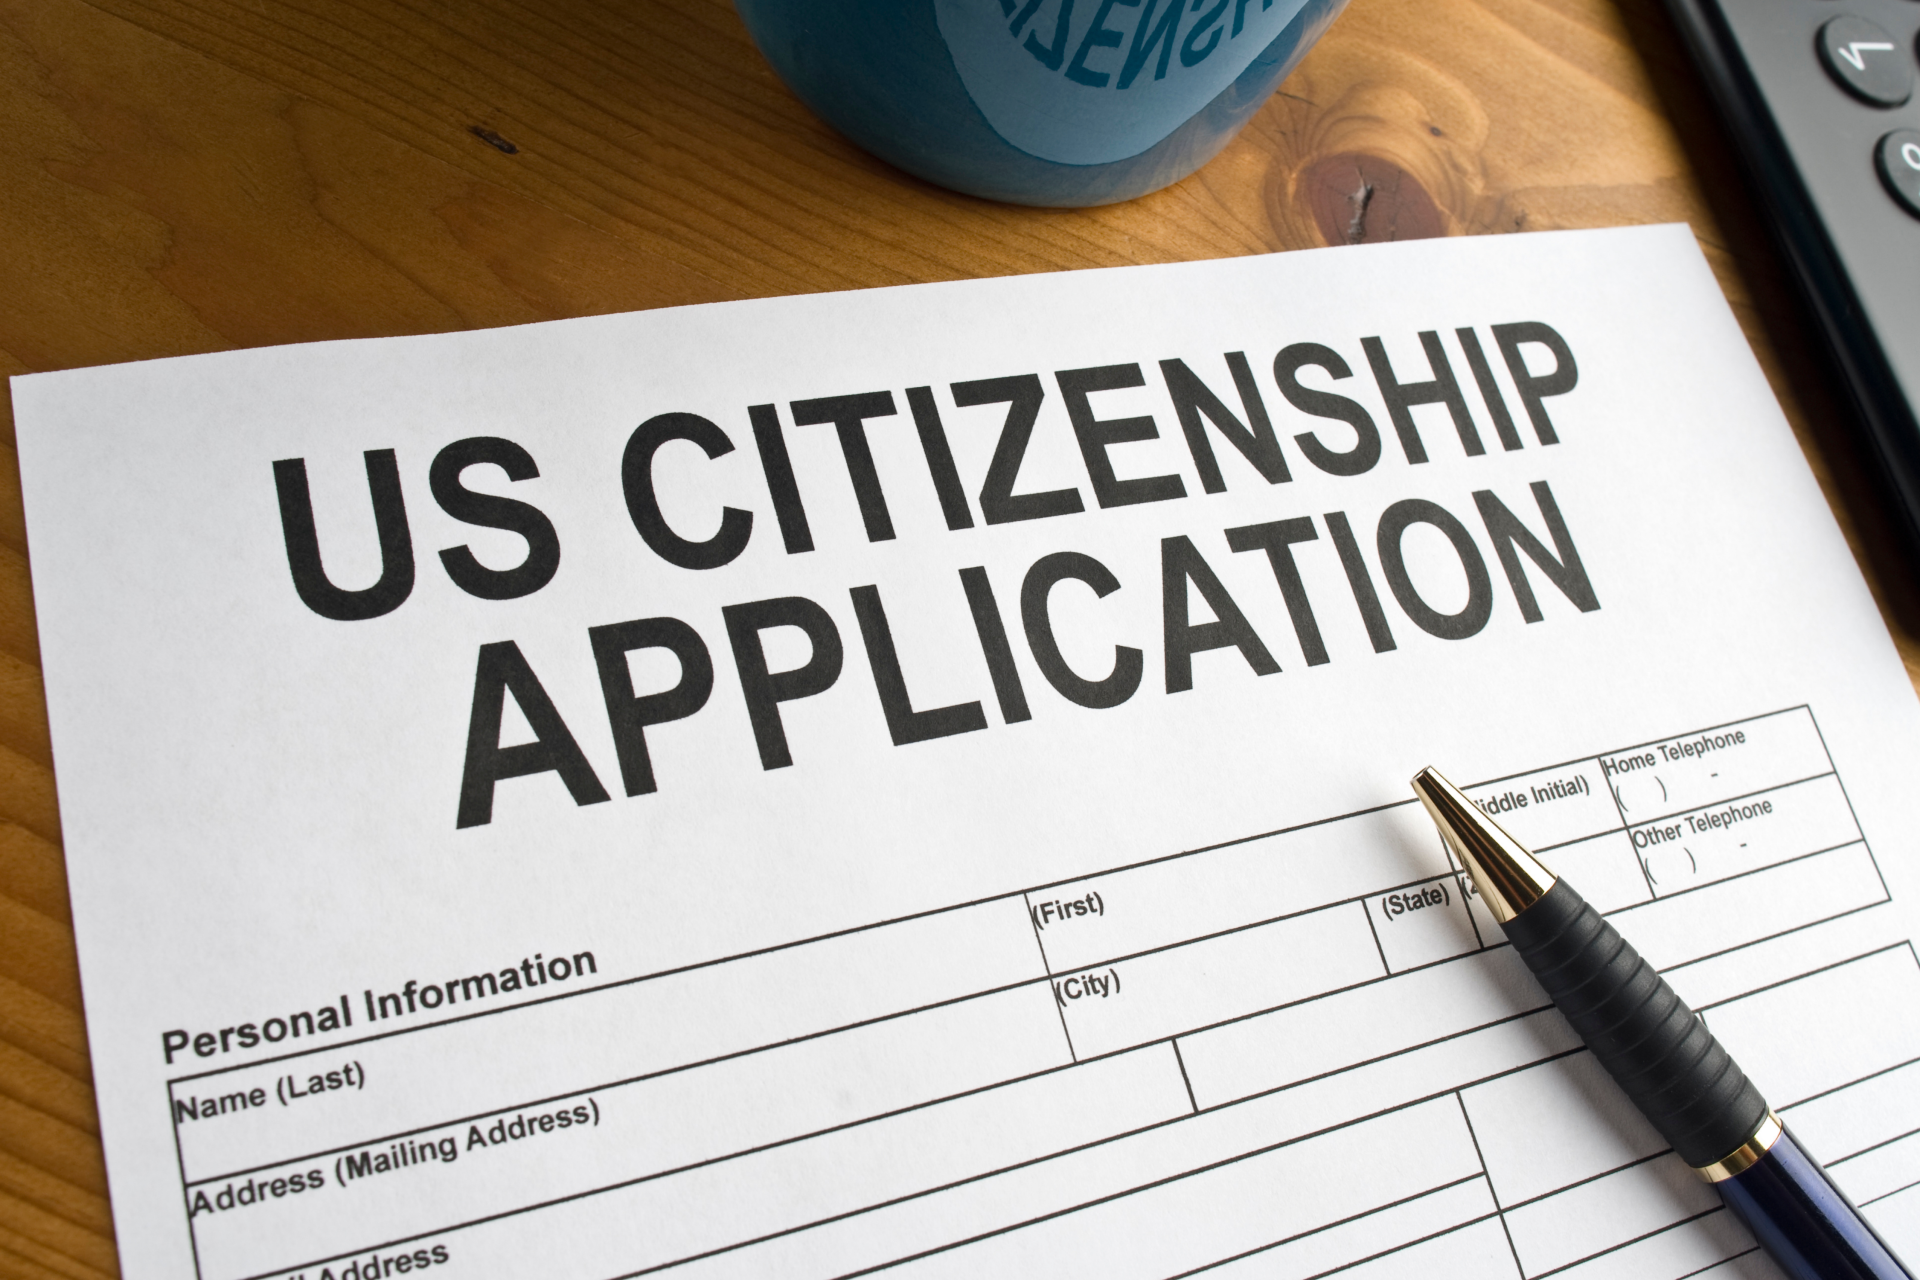 How Many Years Can a Green Card Holder Apply for US Citizenship?